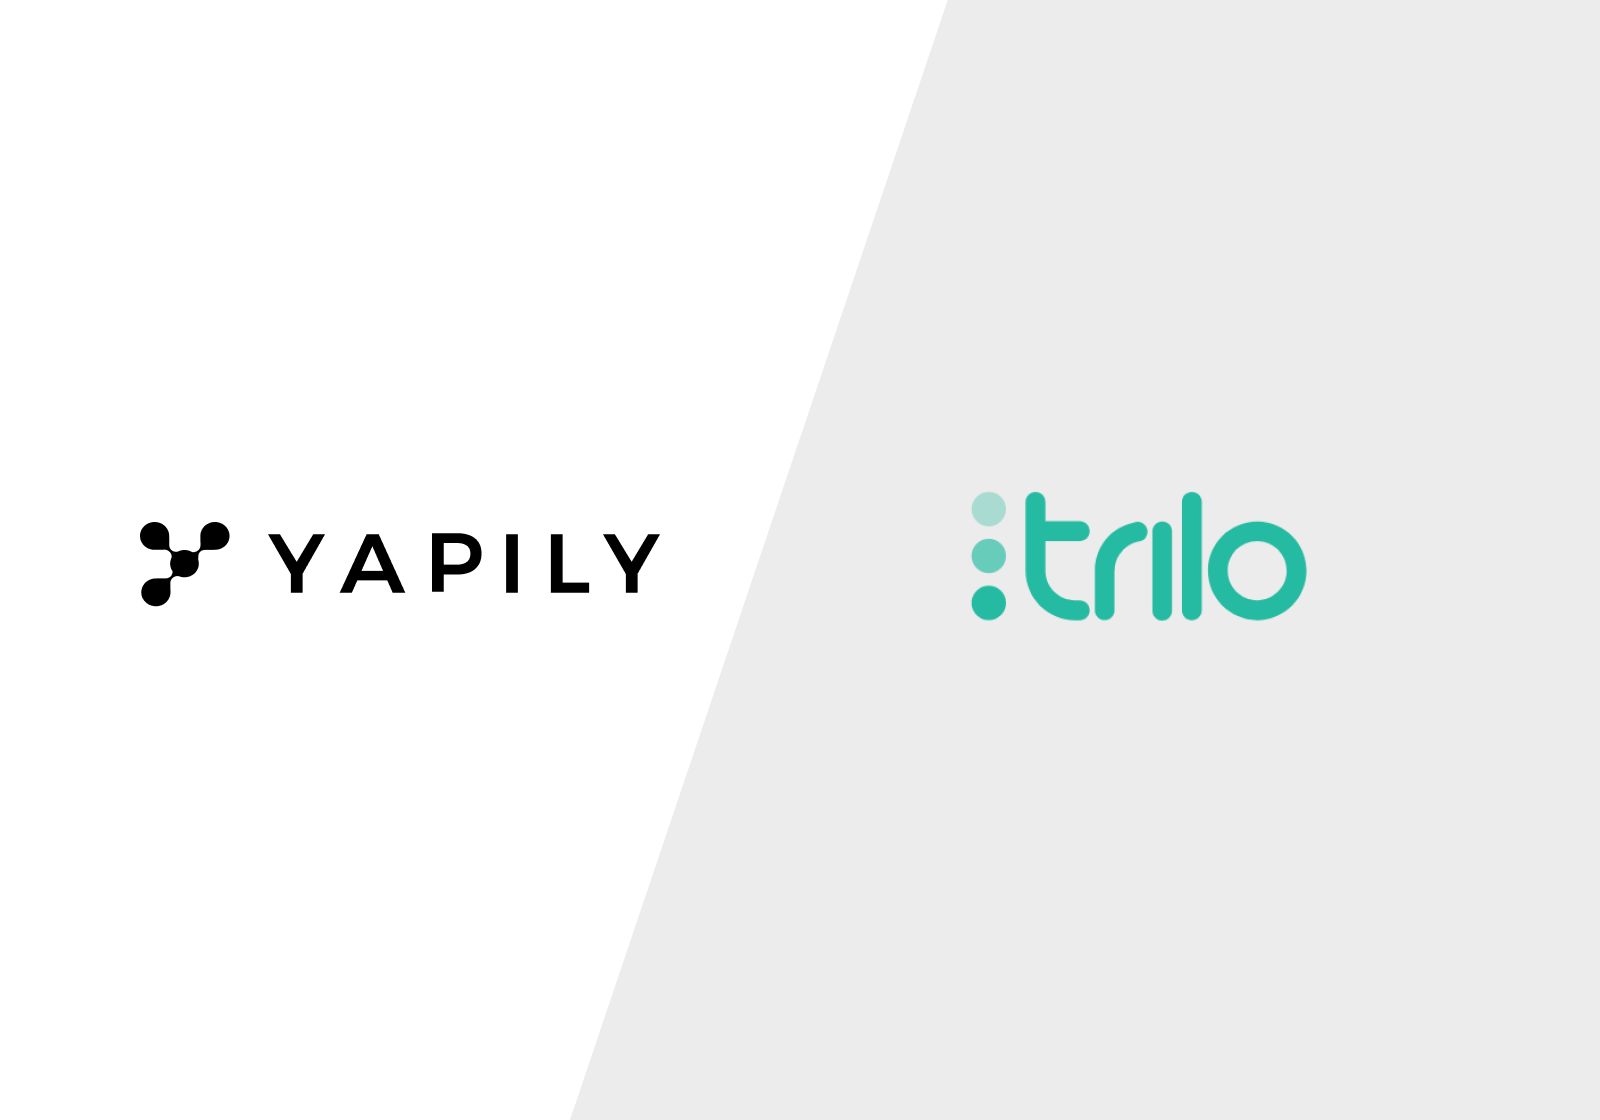 Trilo and Yapily join forces to simplify payments & help businesses supercharge customer experience
